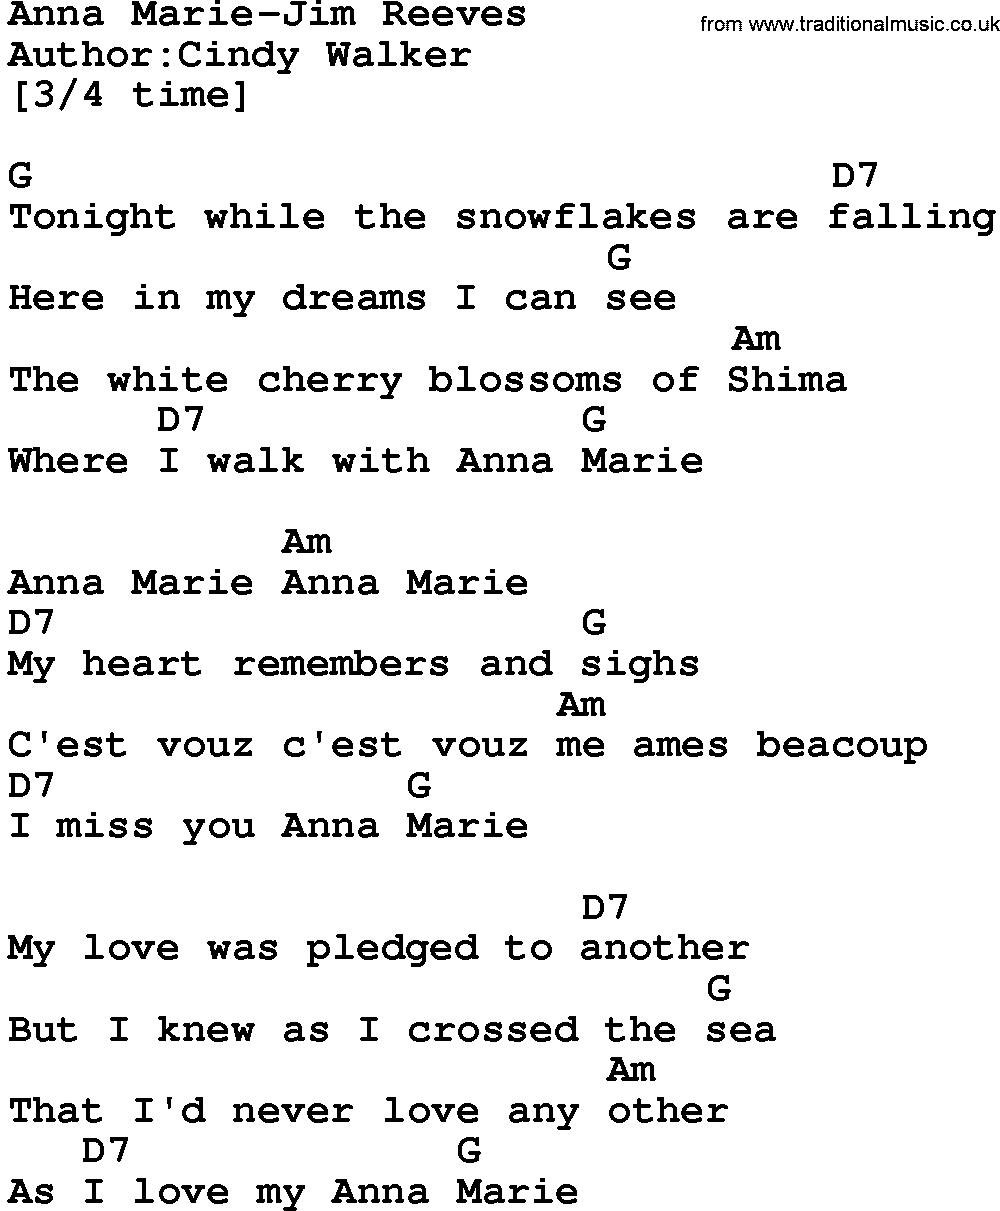 Country music song: Anna Marie-Jim Reeves lyrics and chords